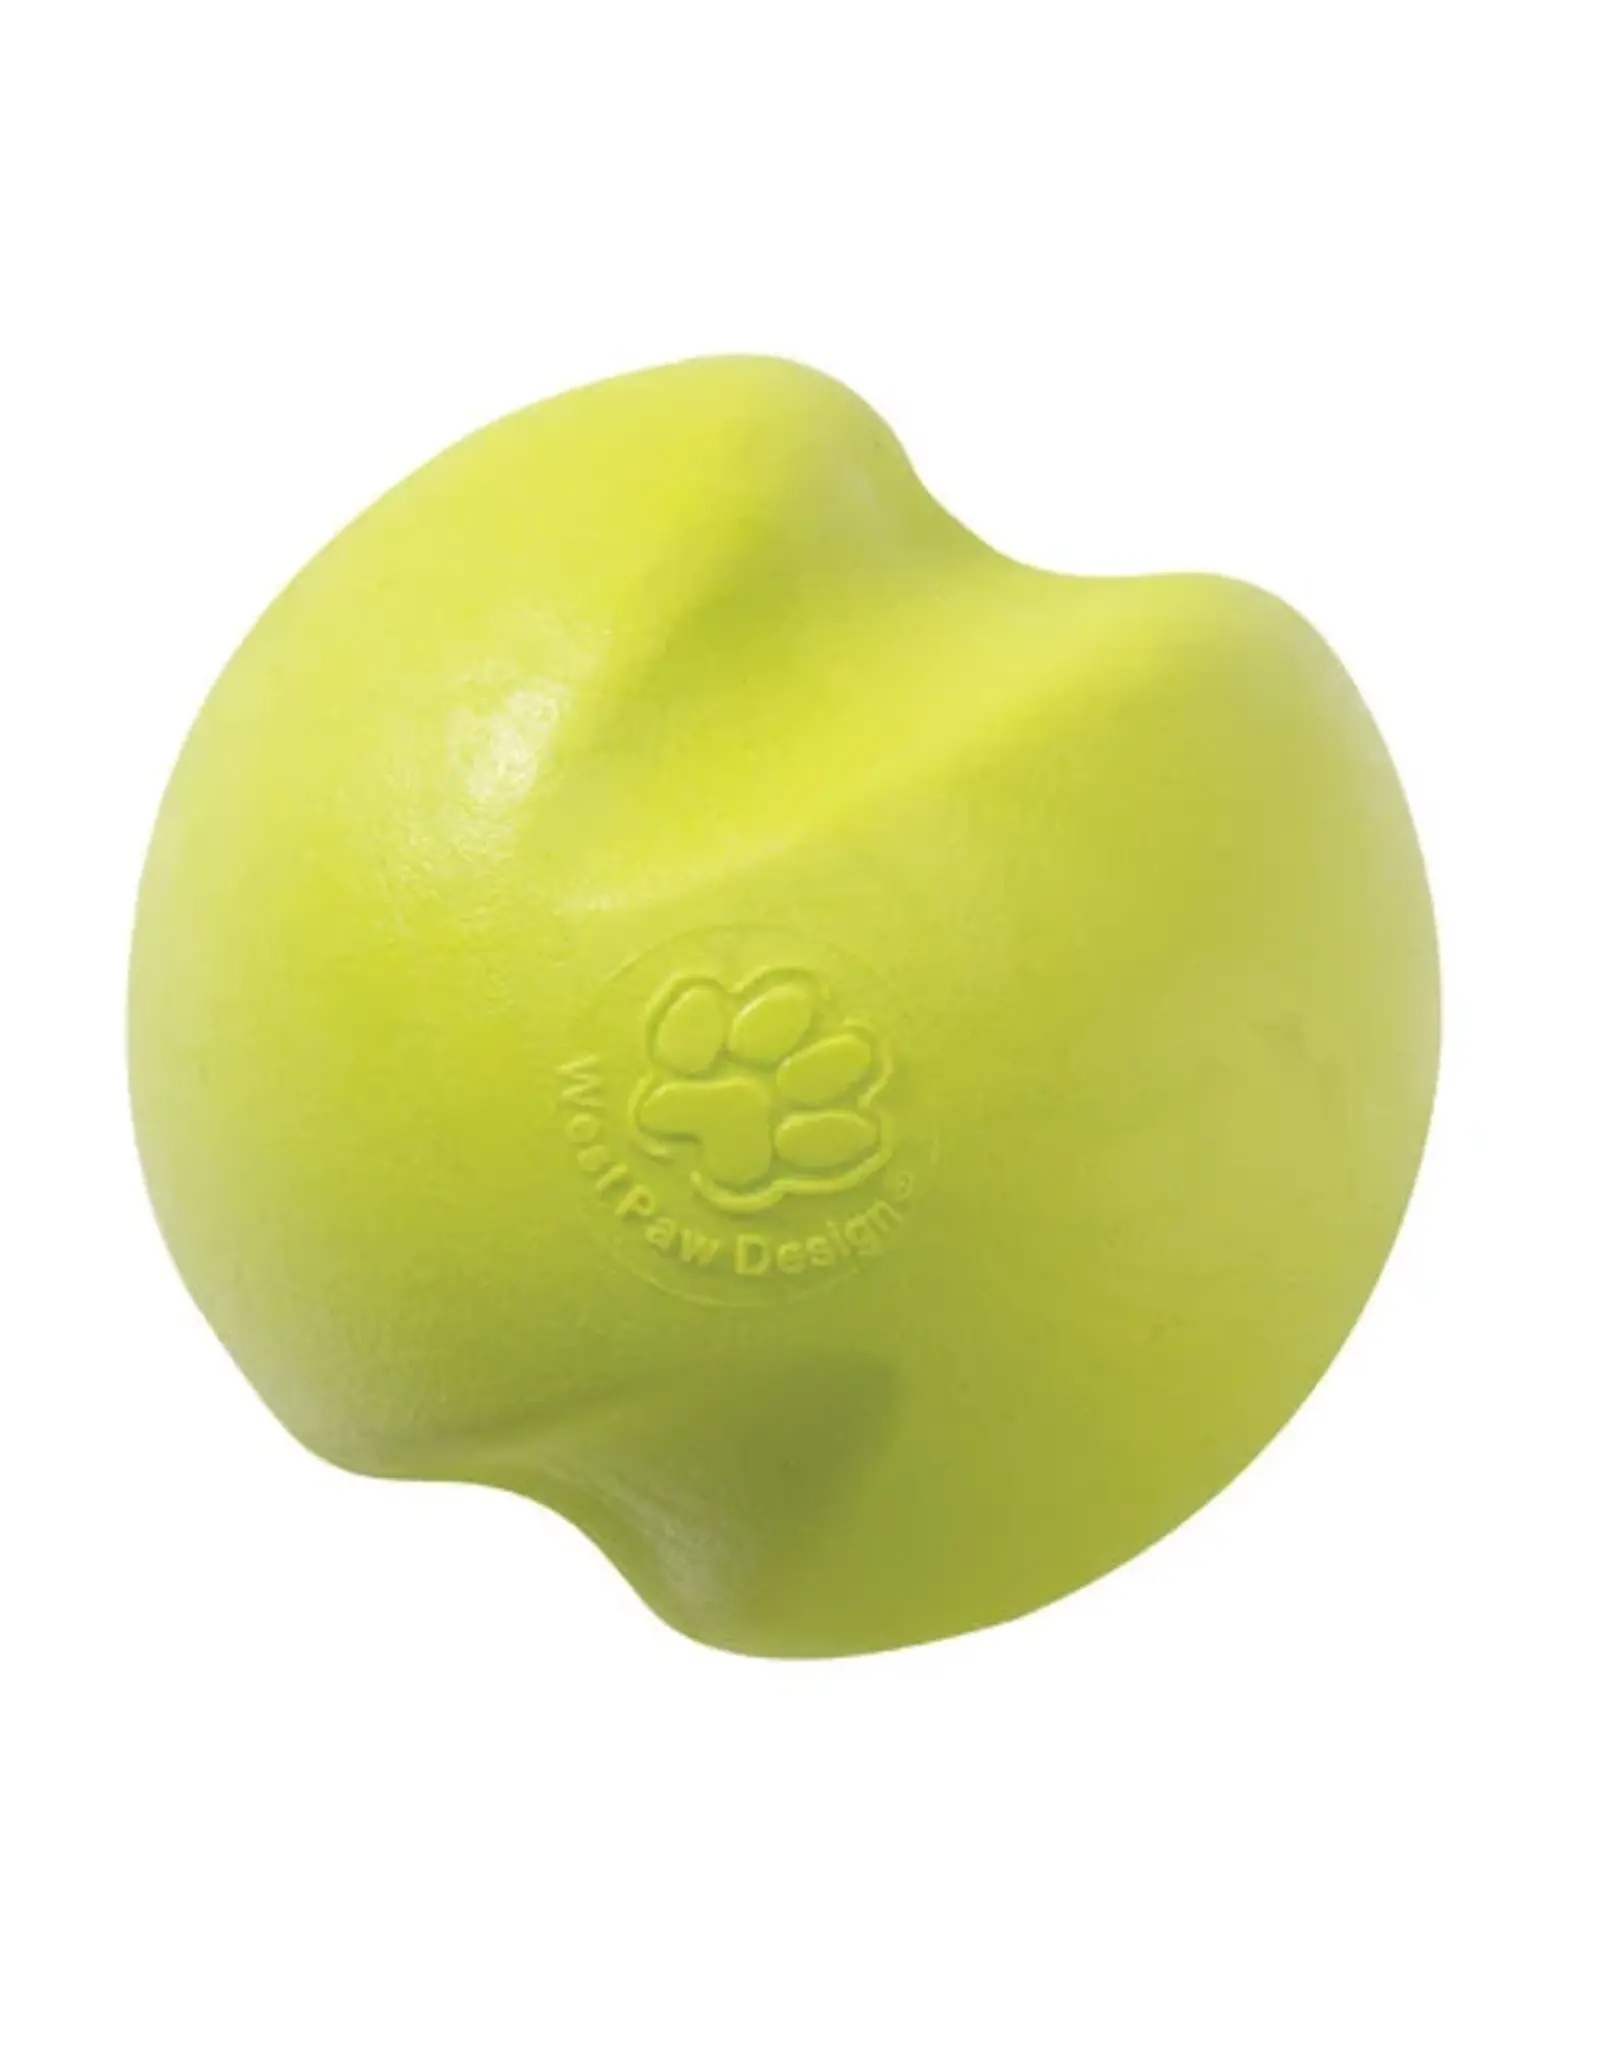 West Paws West Paws - Jive Ball - Small